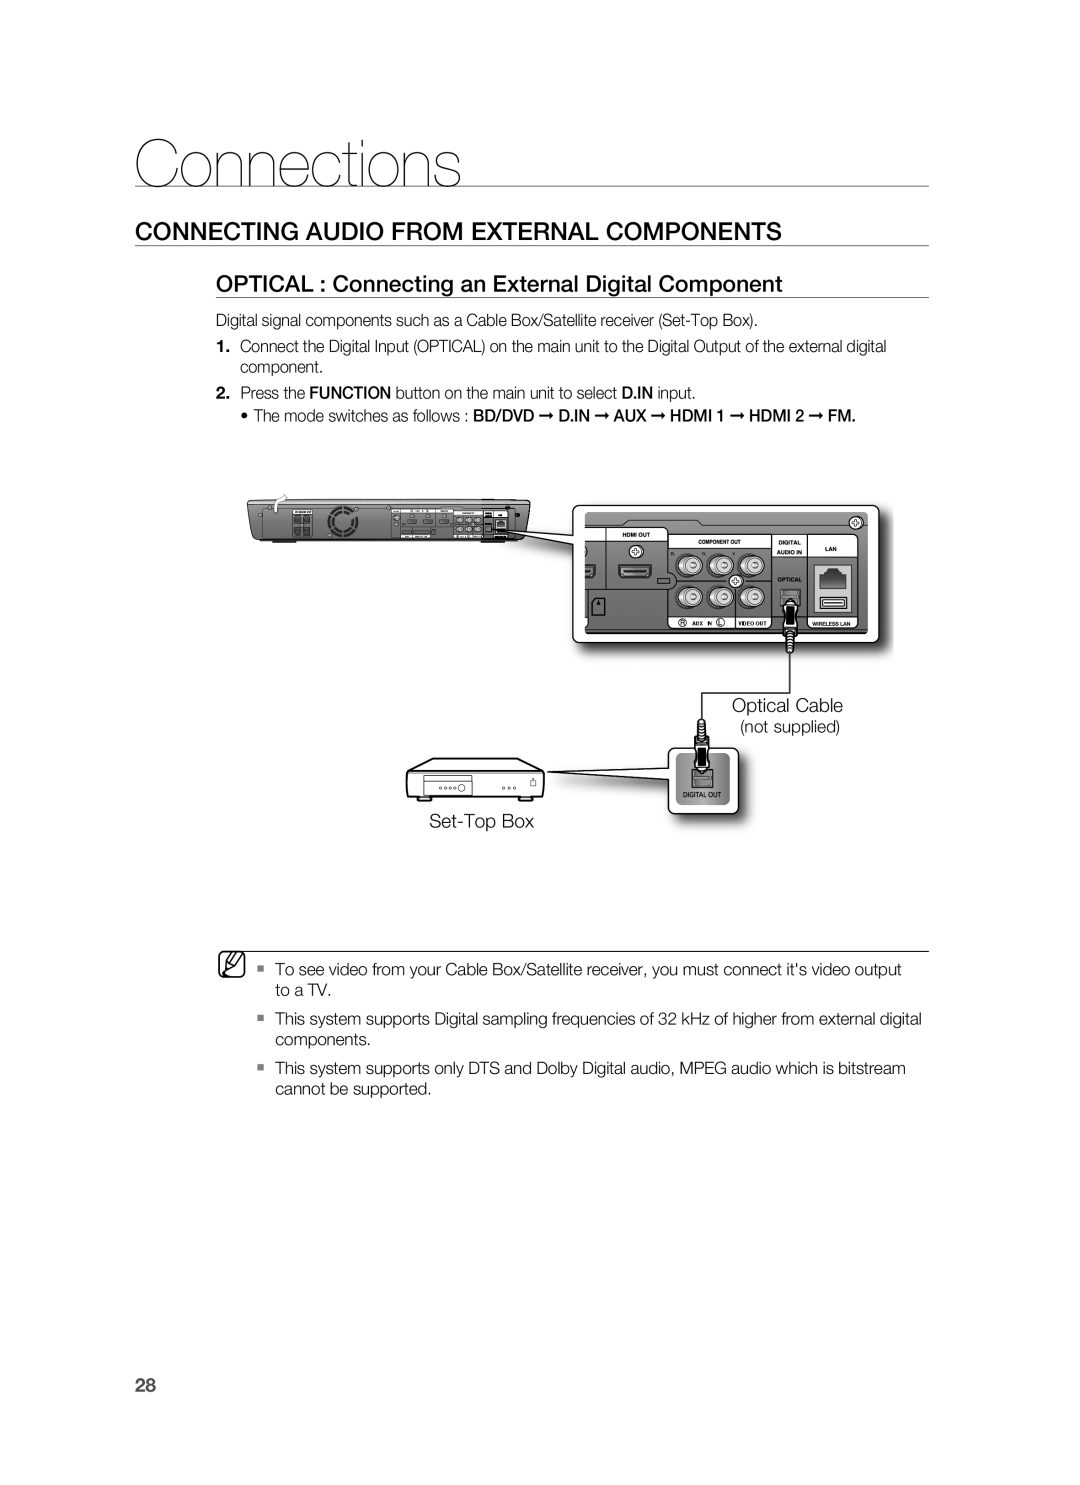 Samsung AH68-02231A, HT-BD3252A Connecting Audio From External Components, Connections, Optical Cable, Set-TopBox 